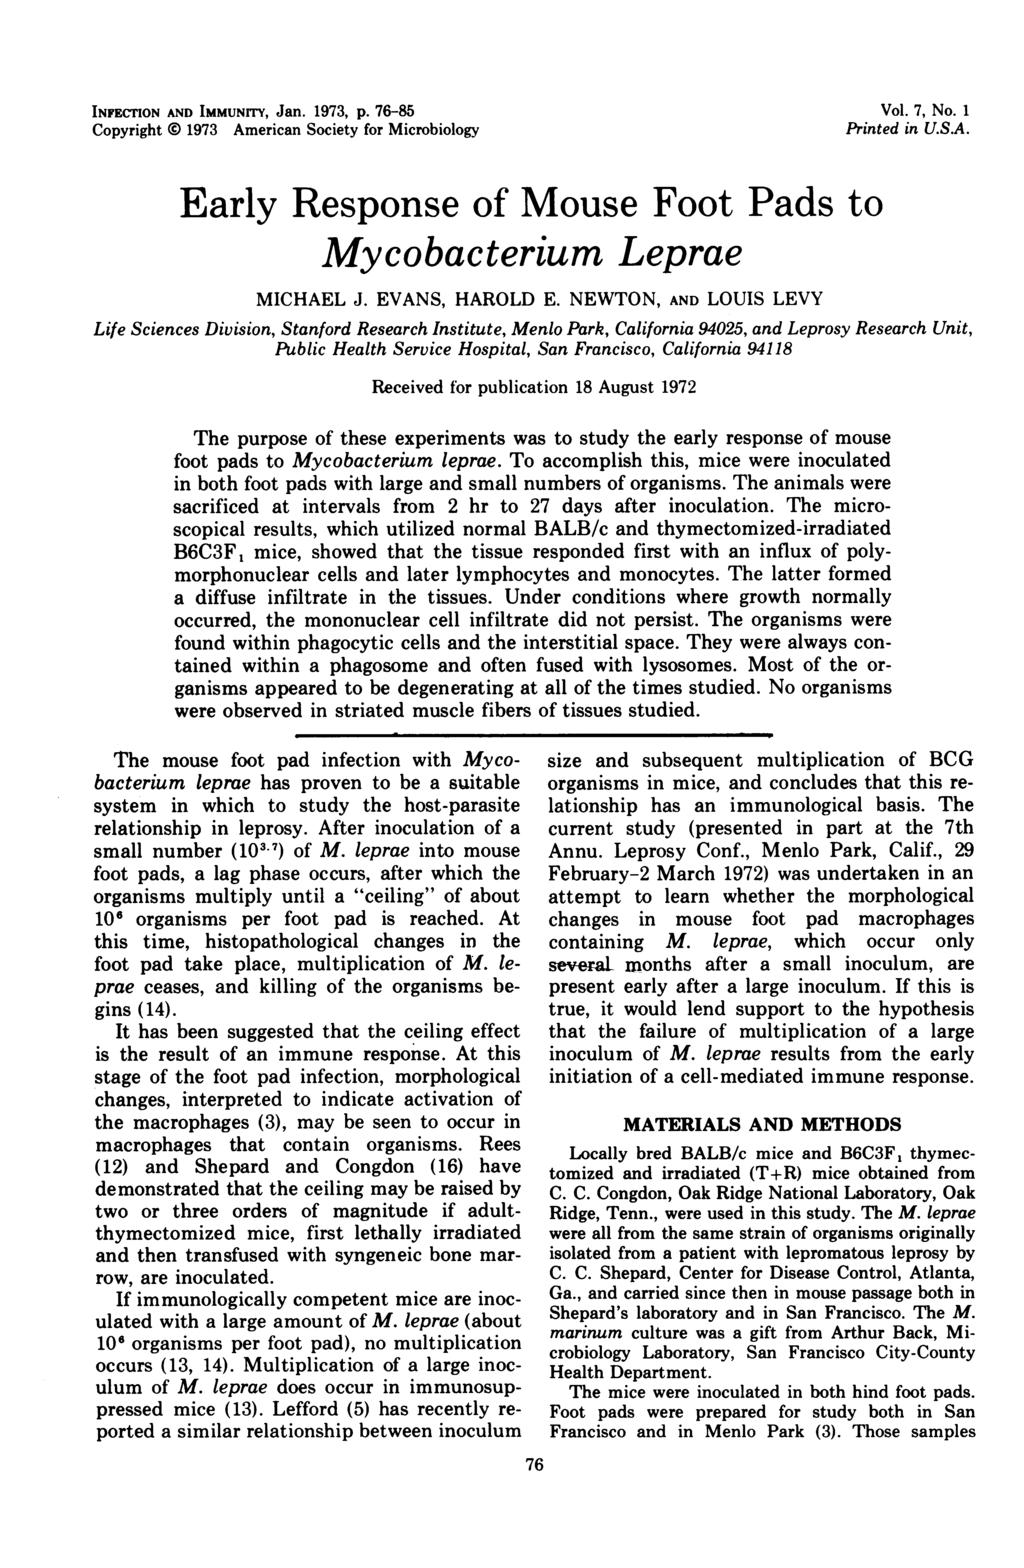 INFECTION AND IMMUNrrY, Jan. 1973, p. 76-85 Copyright 0 1973 American Society for Microbiology Vol. 7, No. 1 Printed in U.S.A. Early Response of Mouse Foot Pads to Mycobacterium Leprae MICHAEL J.